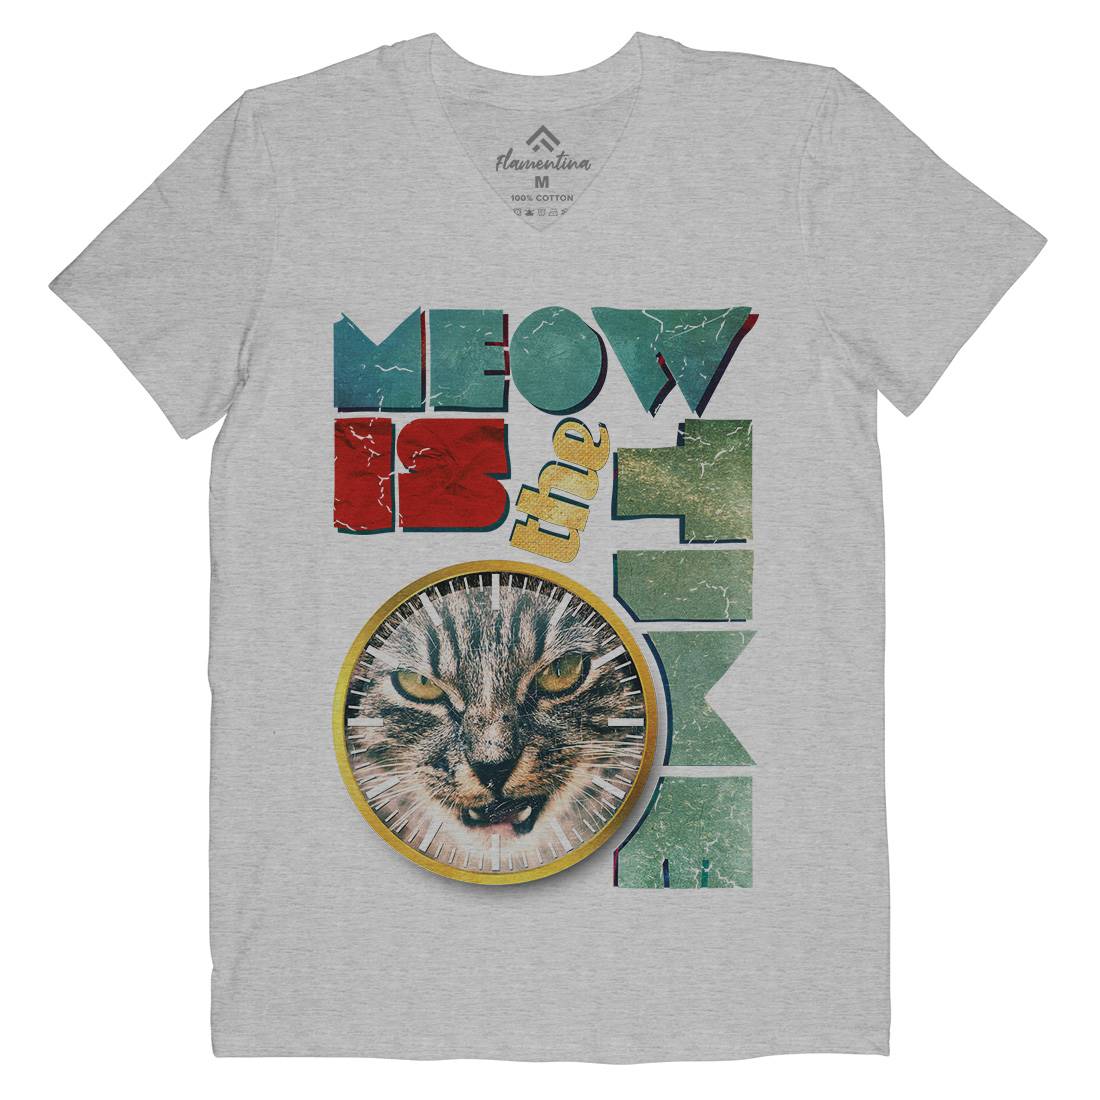 Meow Is The Time Mens Organic V-Neck T-Shirt Animals A876